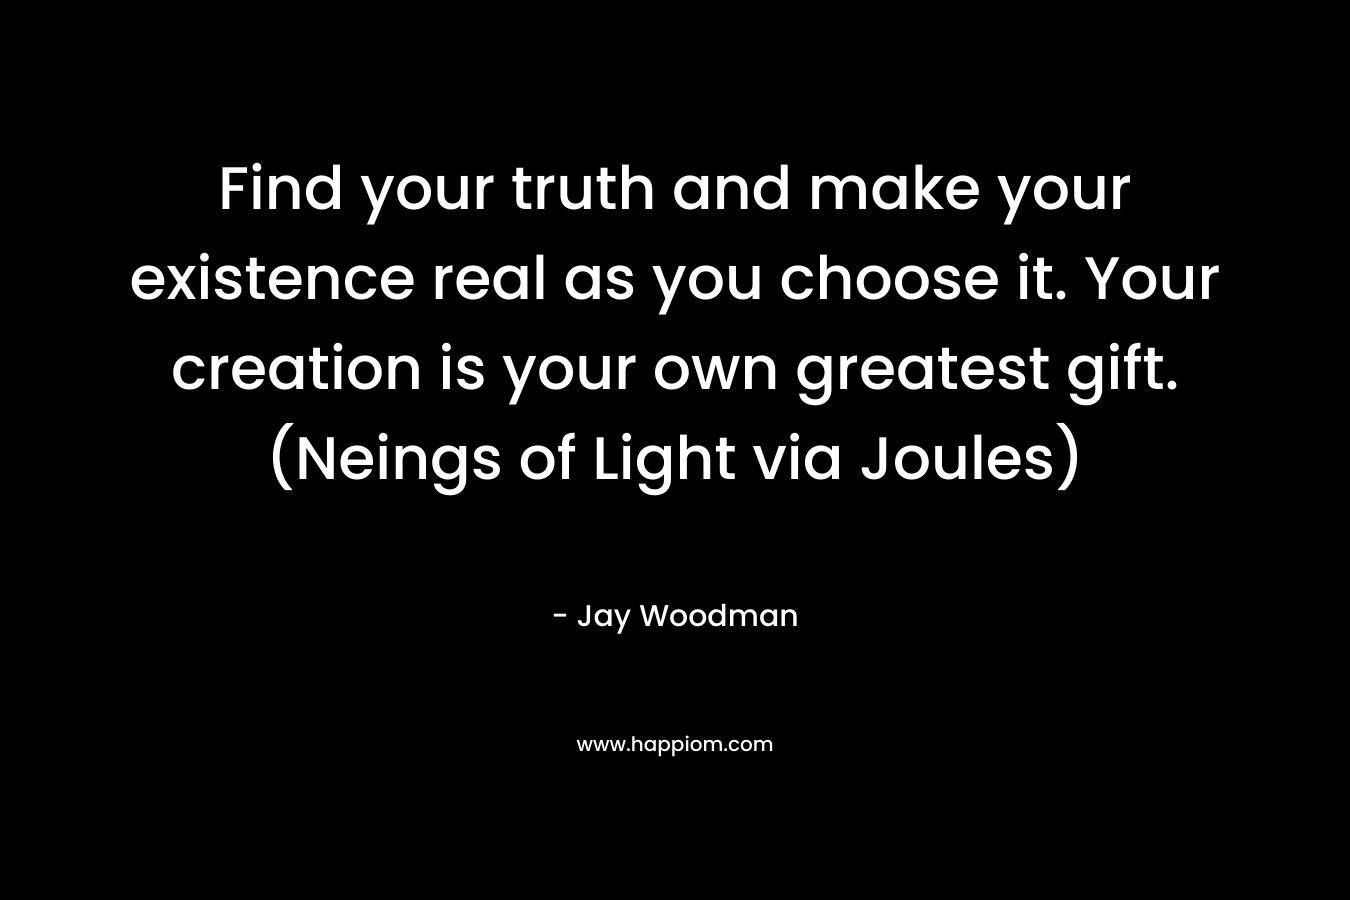 Find your truth and make your existence real as you choose it. Your creation is your own greatest gift. (Neings of Light via Joules) – Jay Woodman